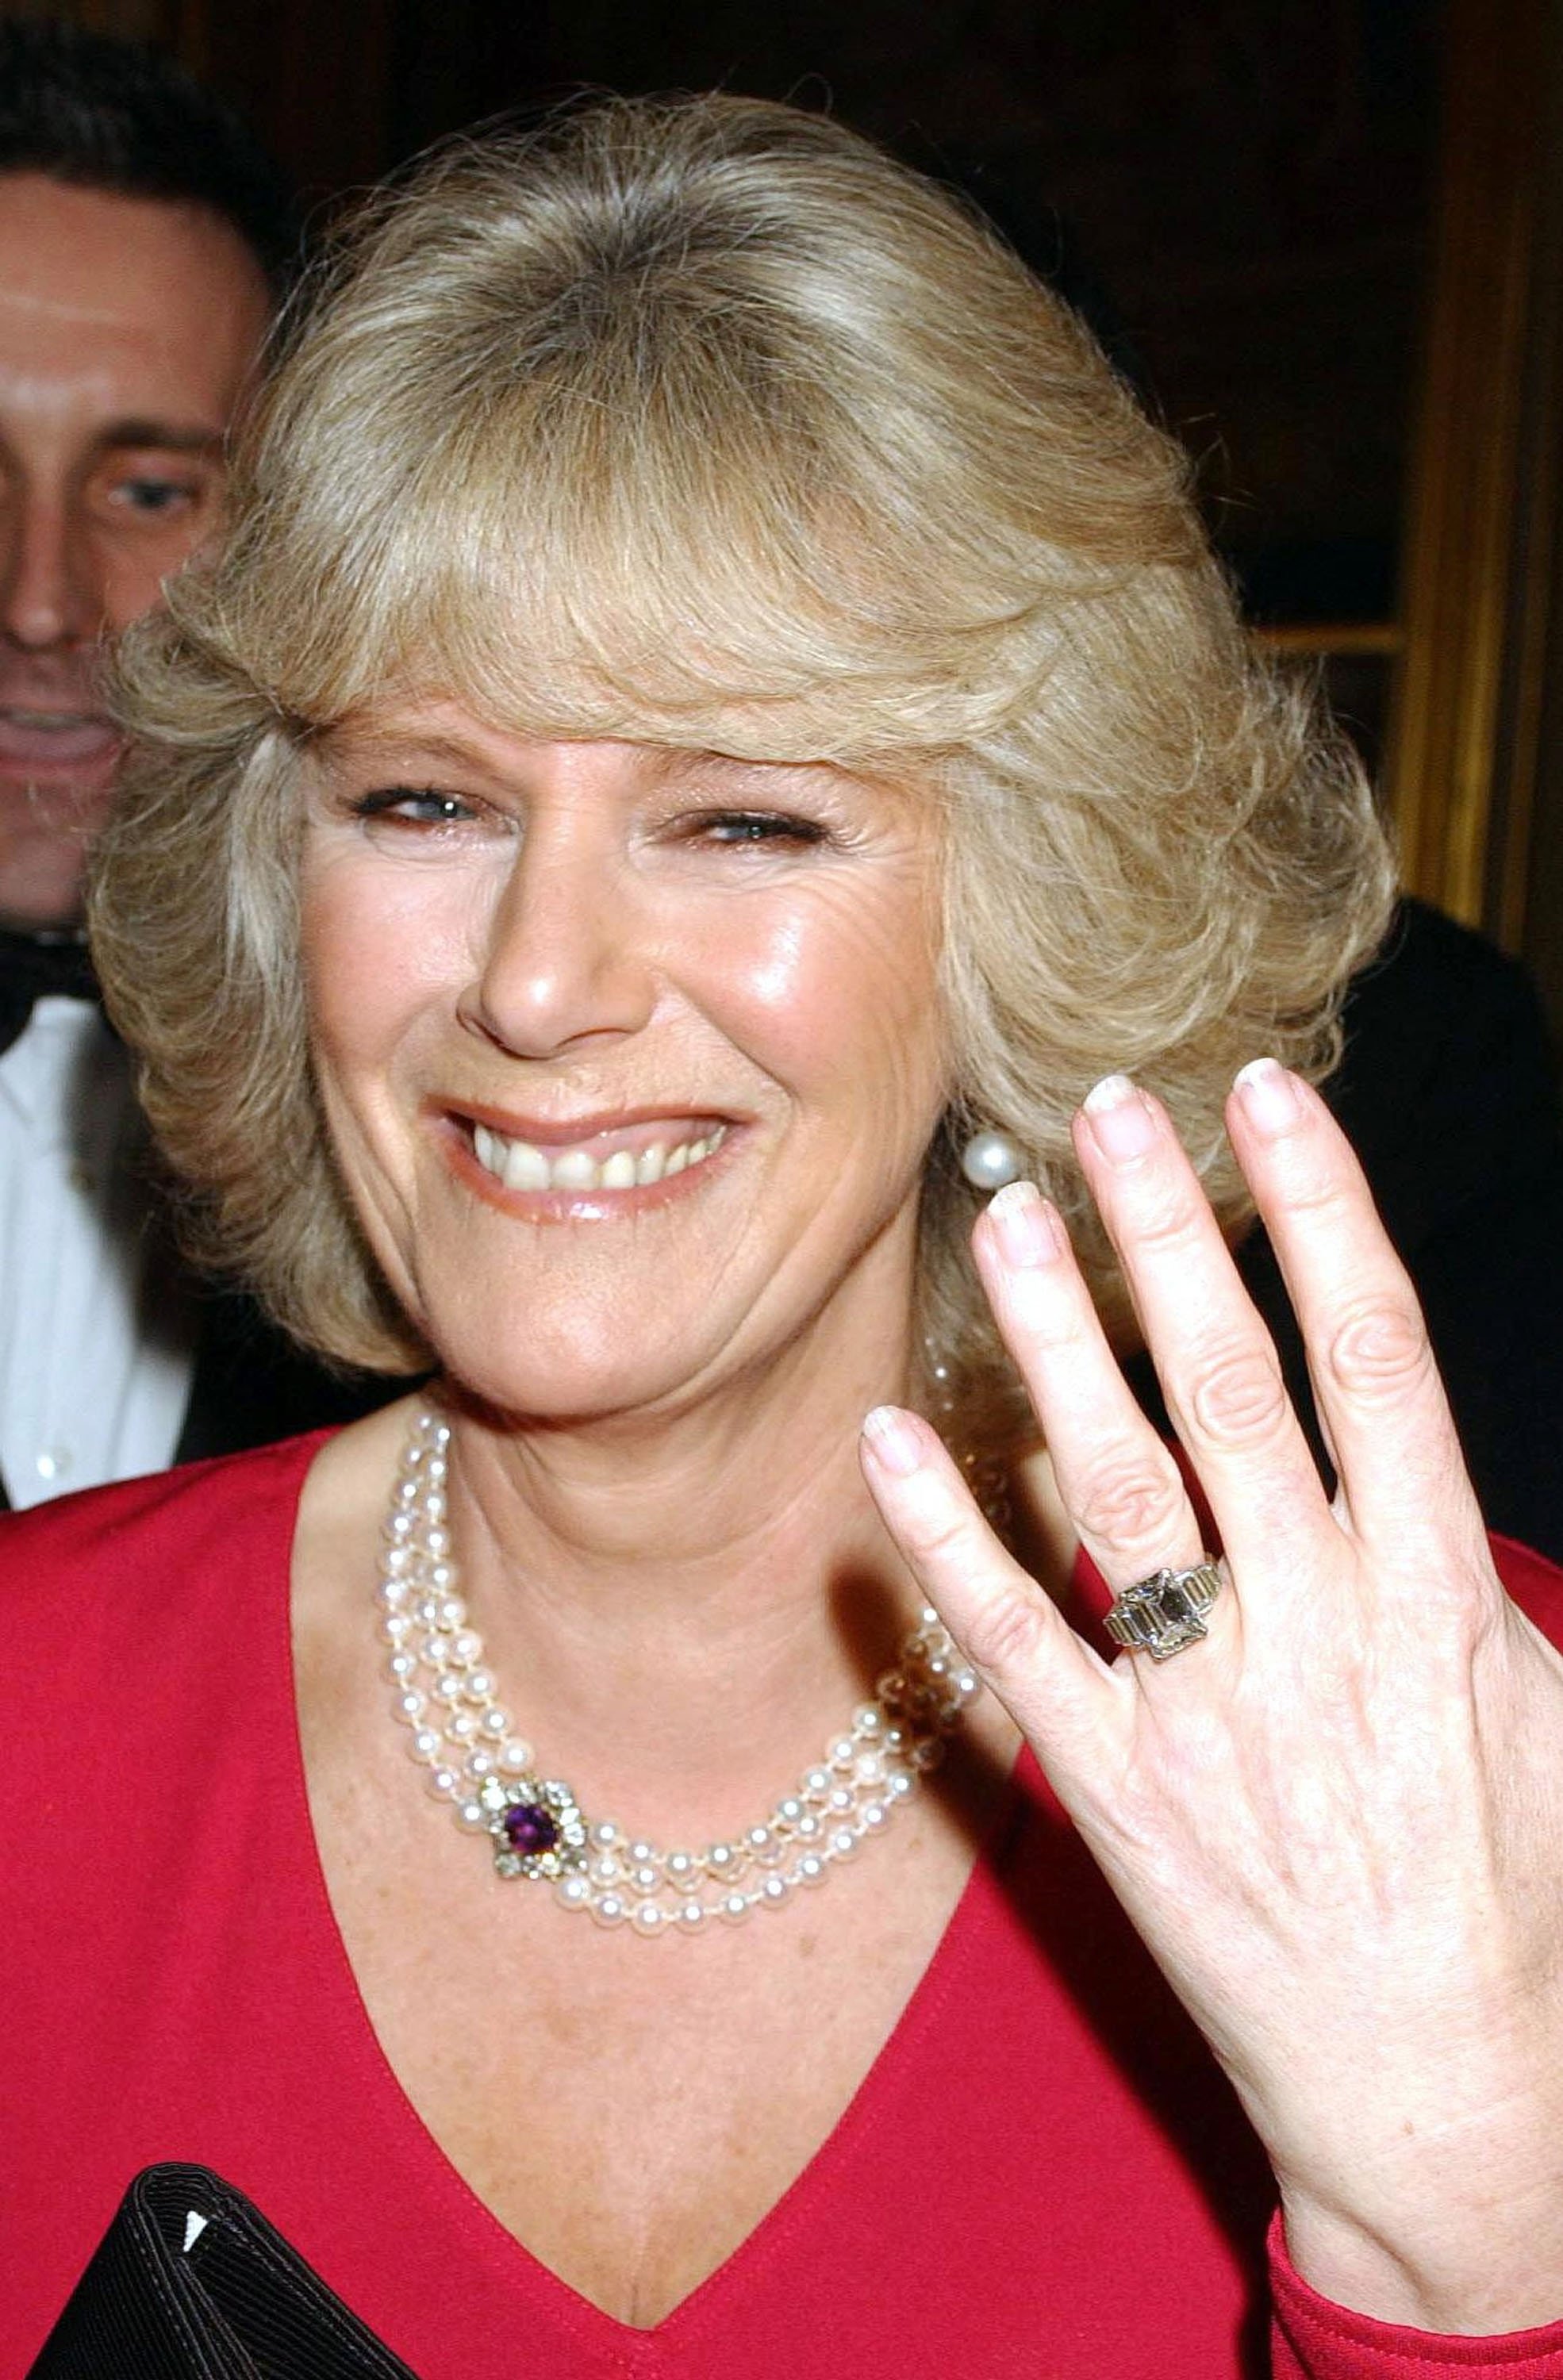 Camilla Parker Bowles showing off her engagement ring upon her arrival for a party at Windsor Castle on 10 February, 2005 in Windsor, England | Source: Getty Images